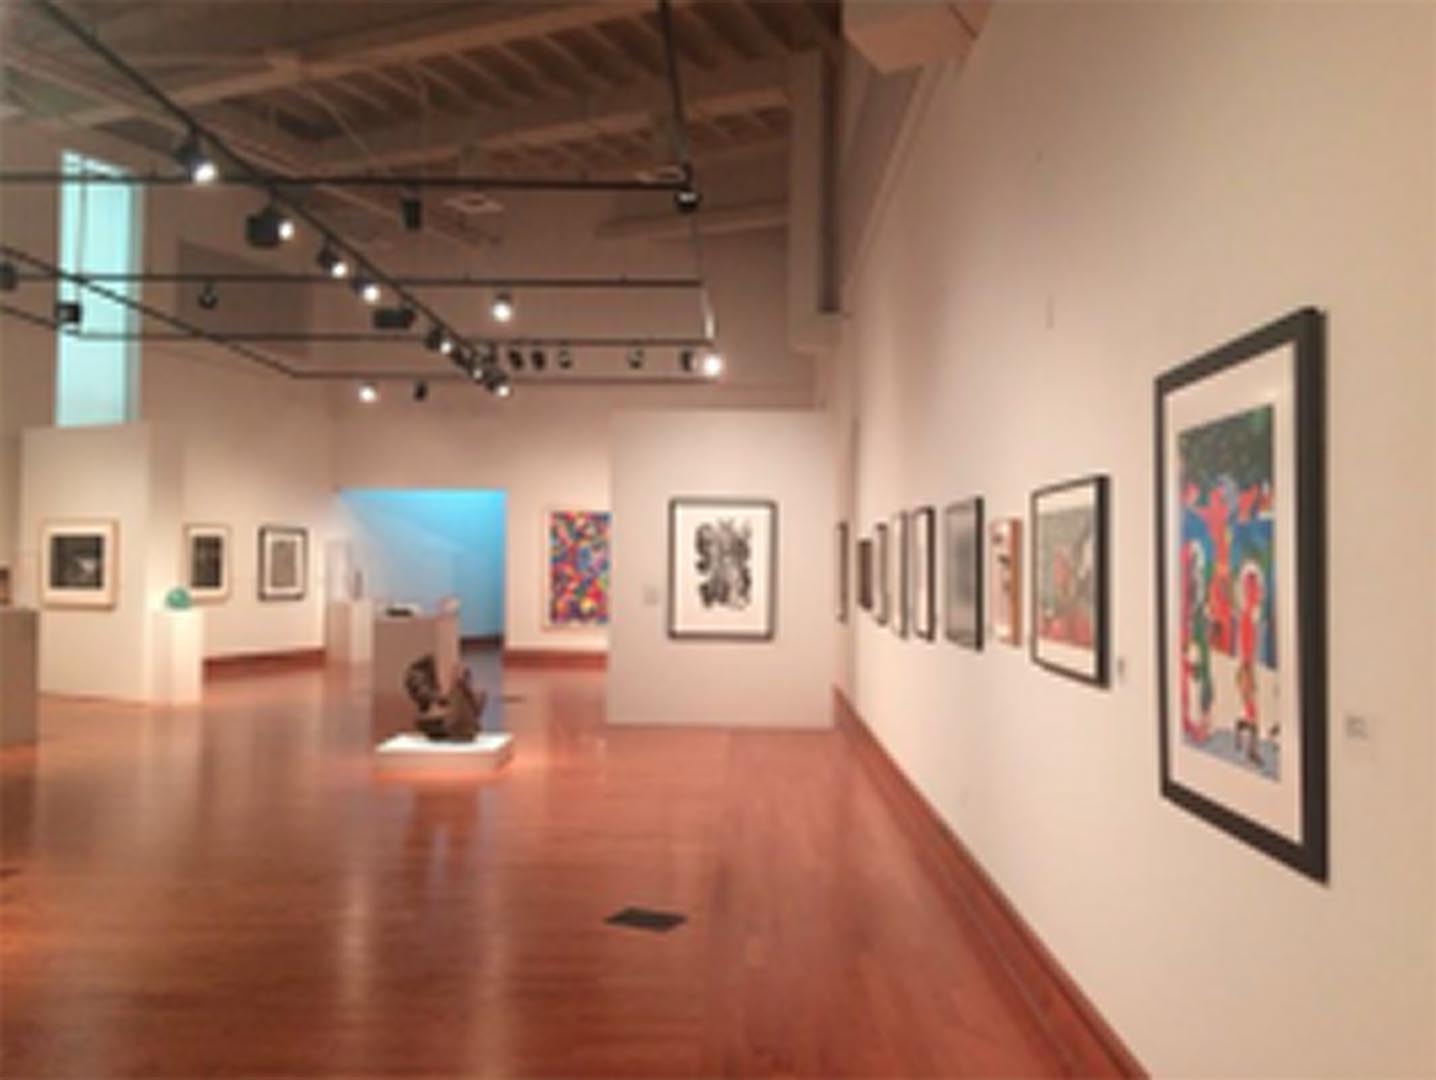 The Driskell Center Reflects On Its Last 10 Years In Current Exhibit